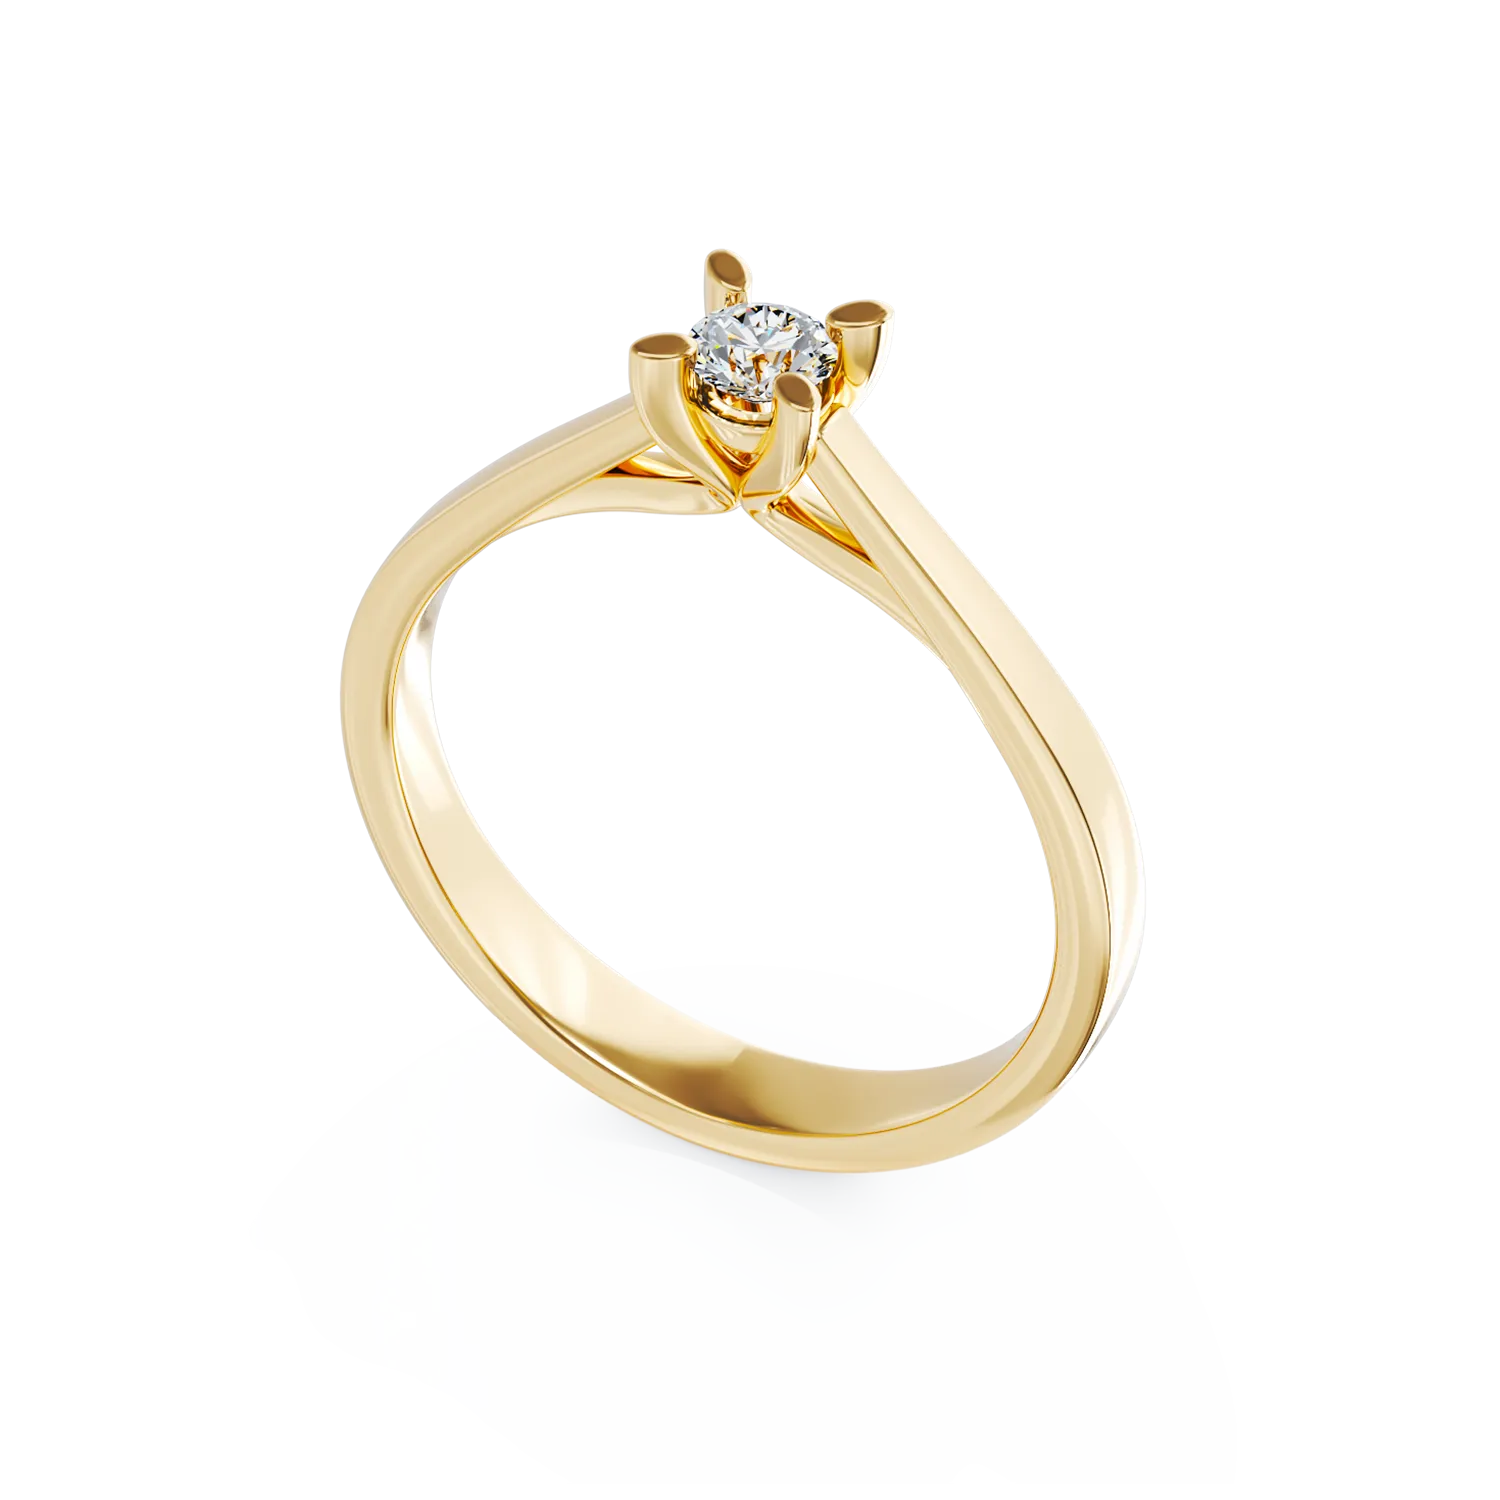 18K yellow gold engagement ring with a 0.2ct solitaire diamond